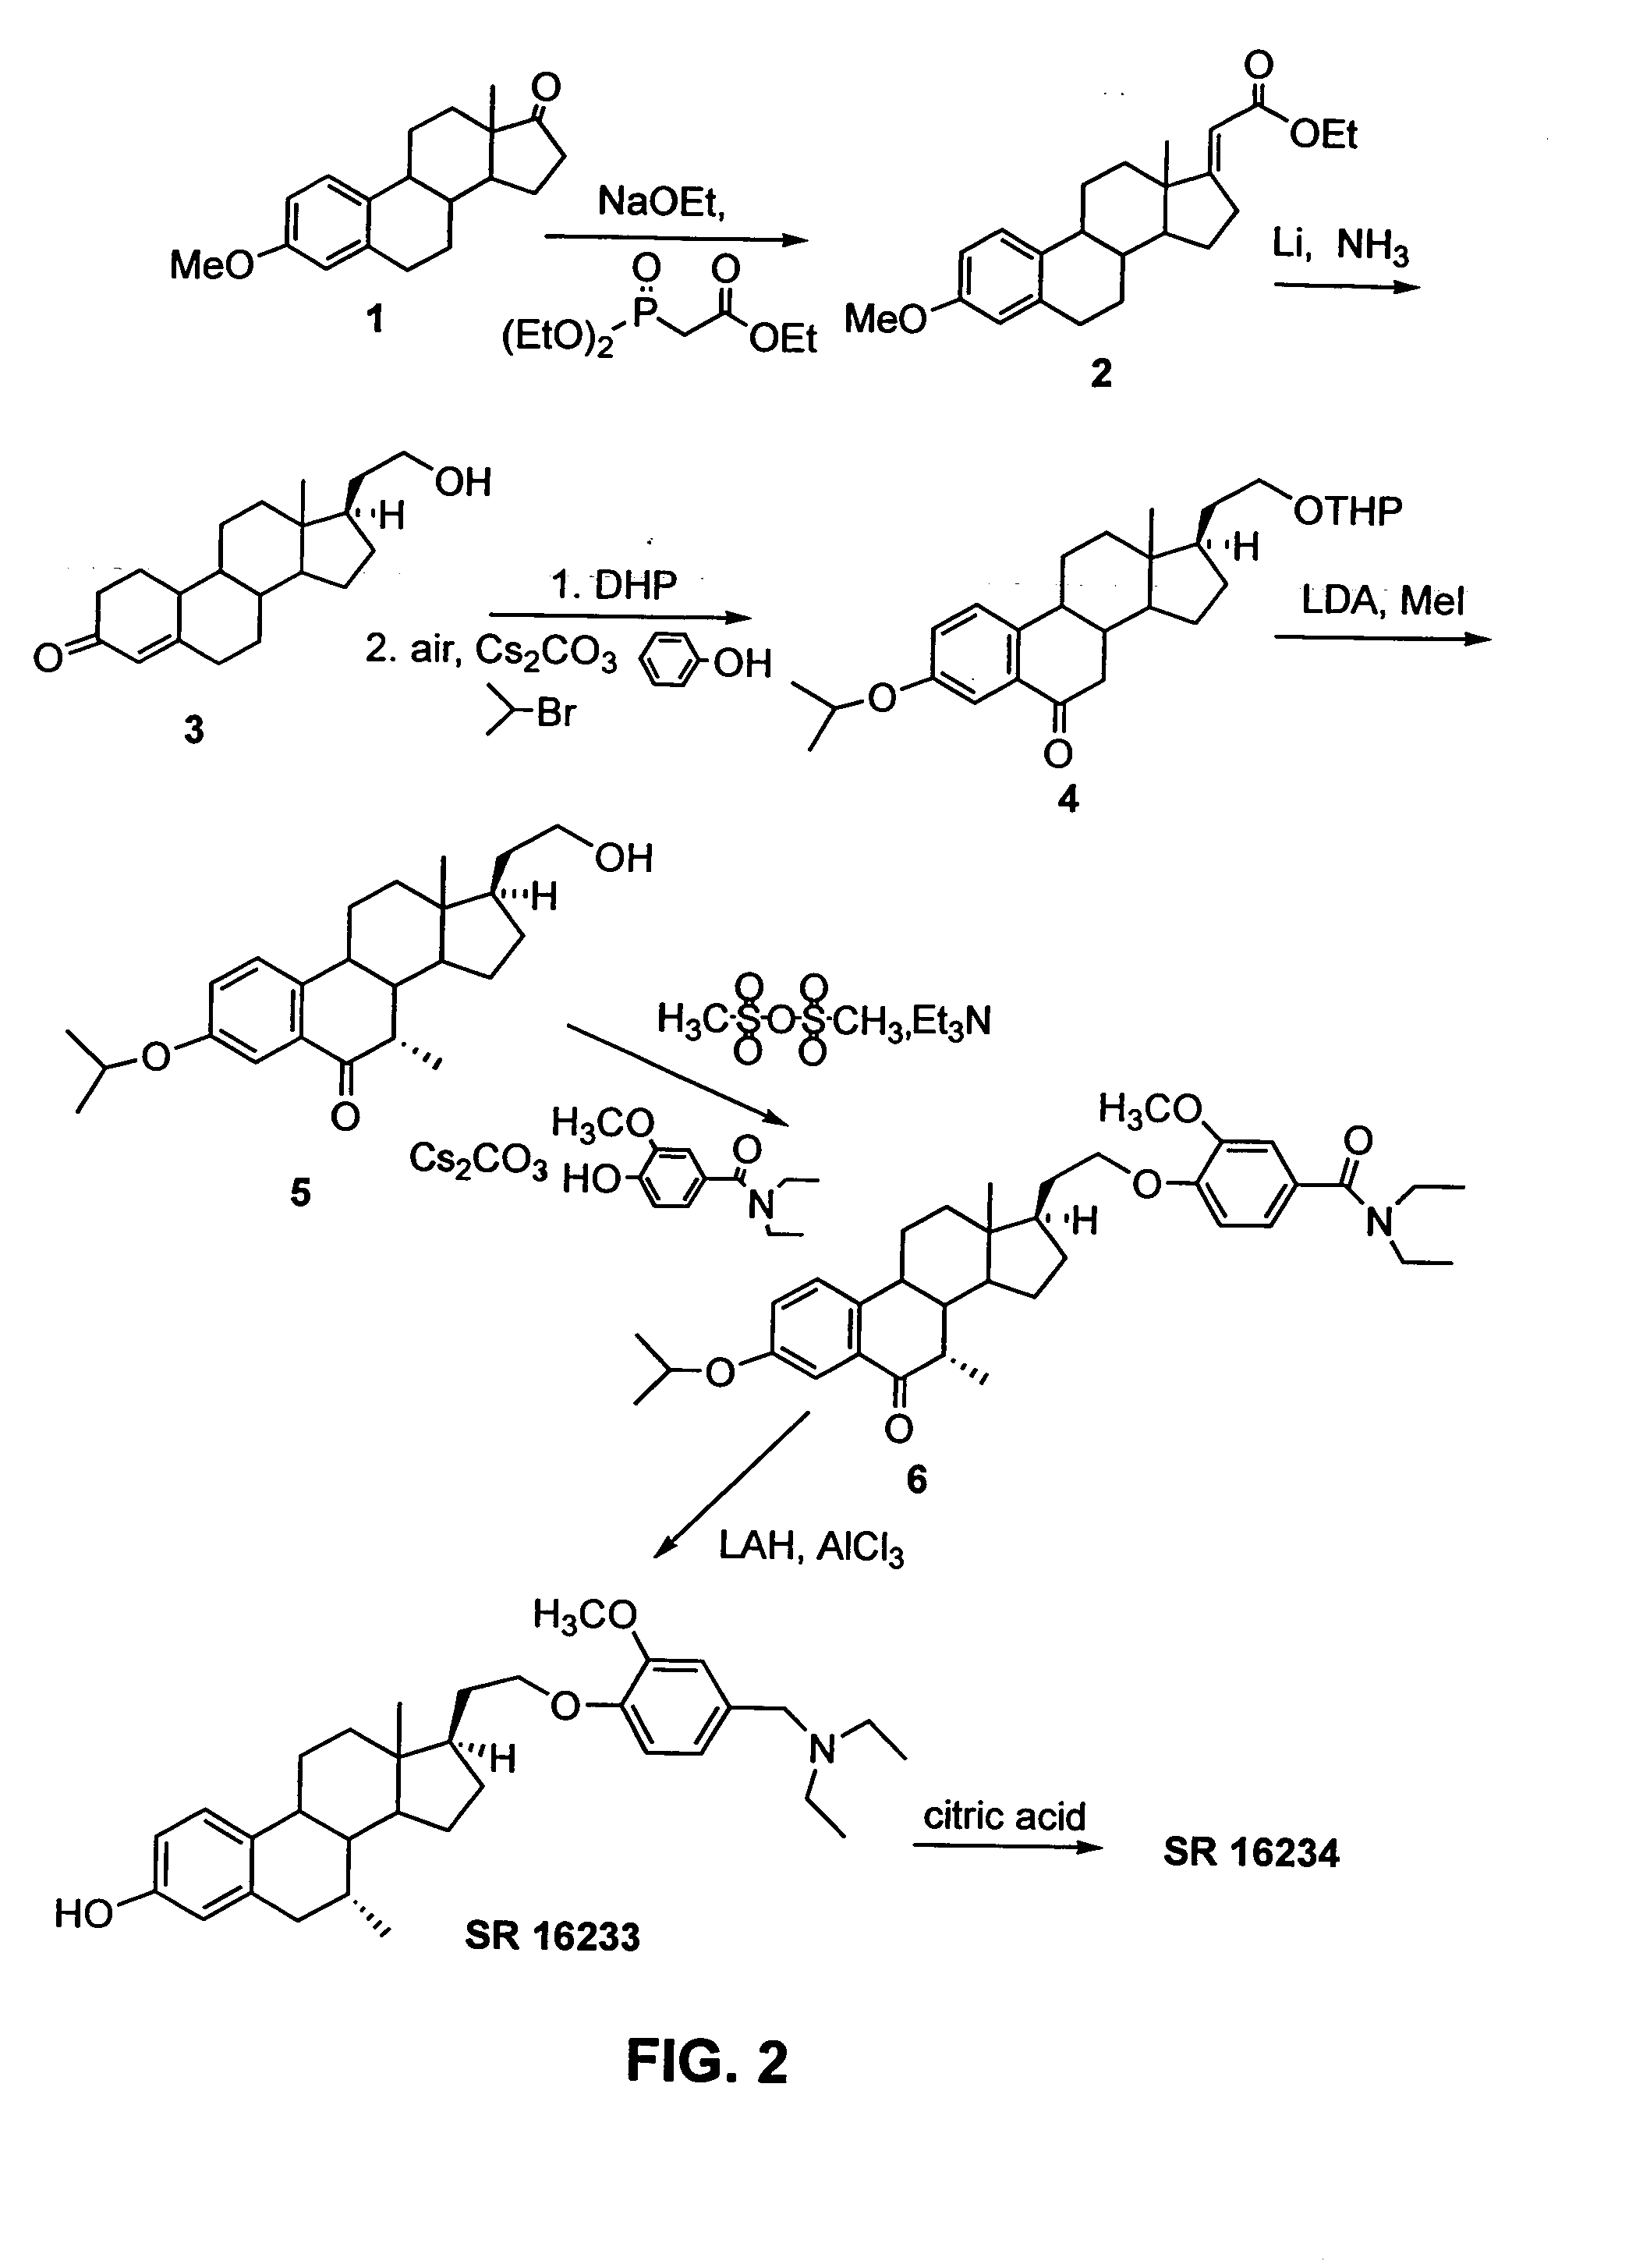 Synthesis of anti-estrogenic and other therapeutic steroids from 21-hydroxy-19-norpregna-4-en-3-one